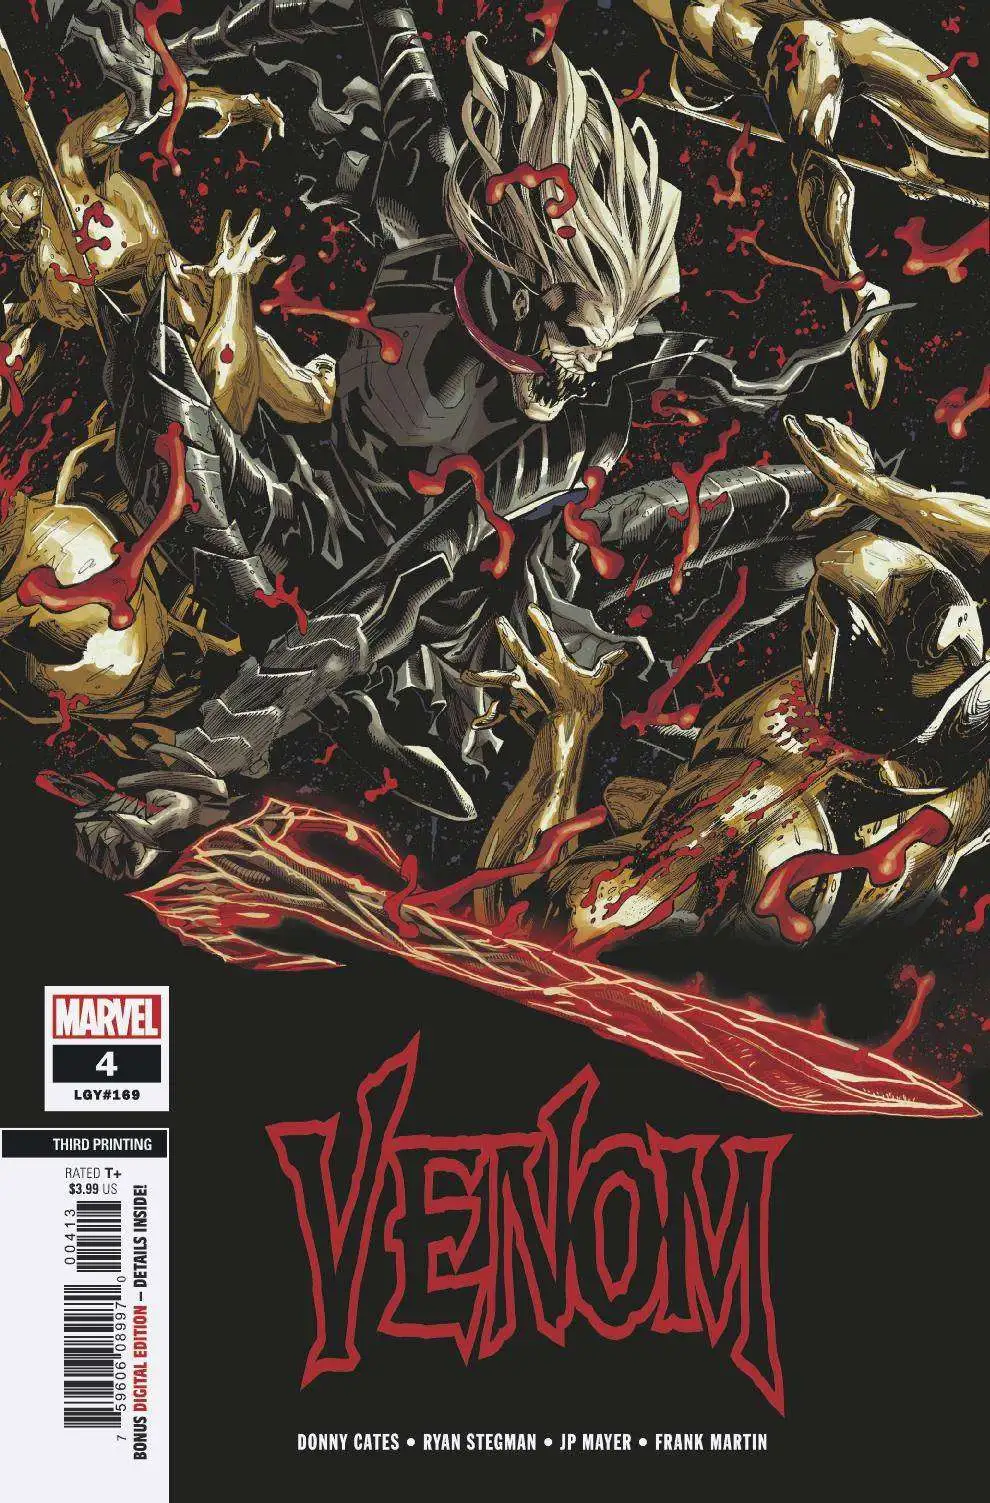 1ST PRINTING MAIN COVER MARVEL WEB OF VENOM EMPYRES END #1 2020 $4.99 